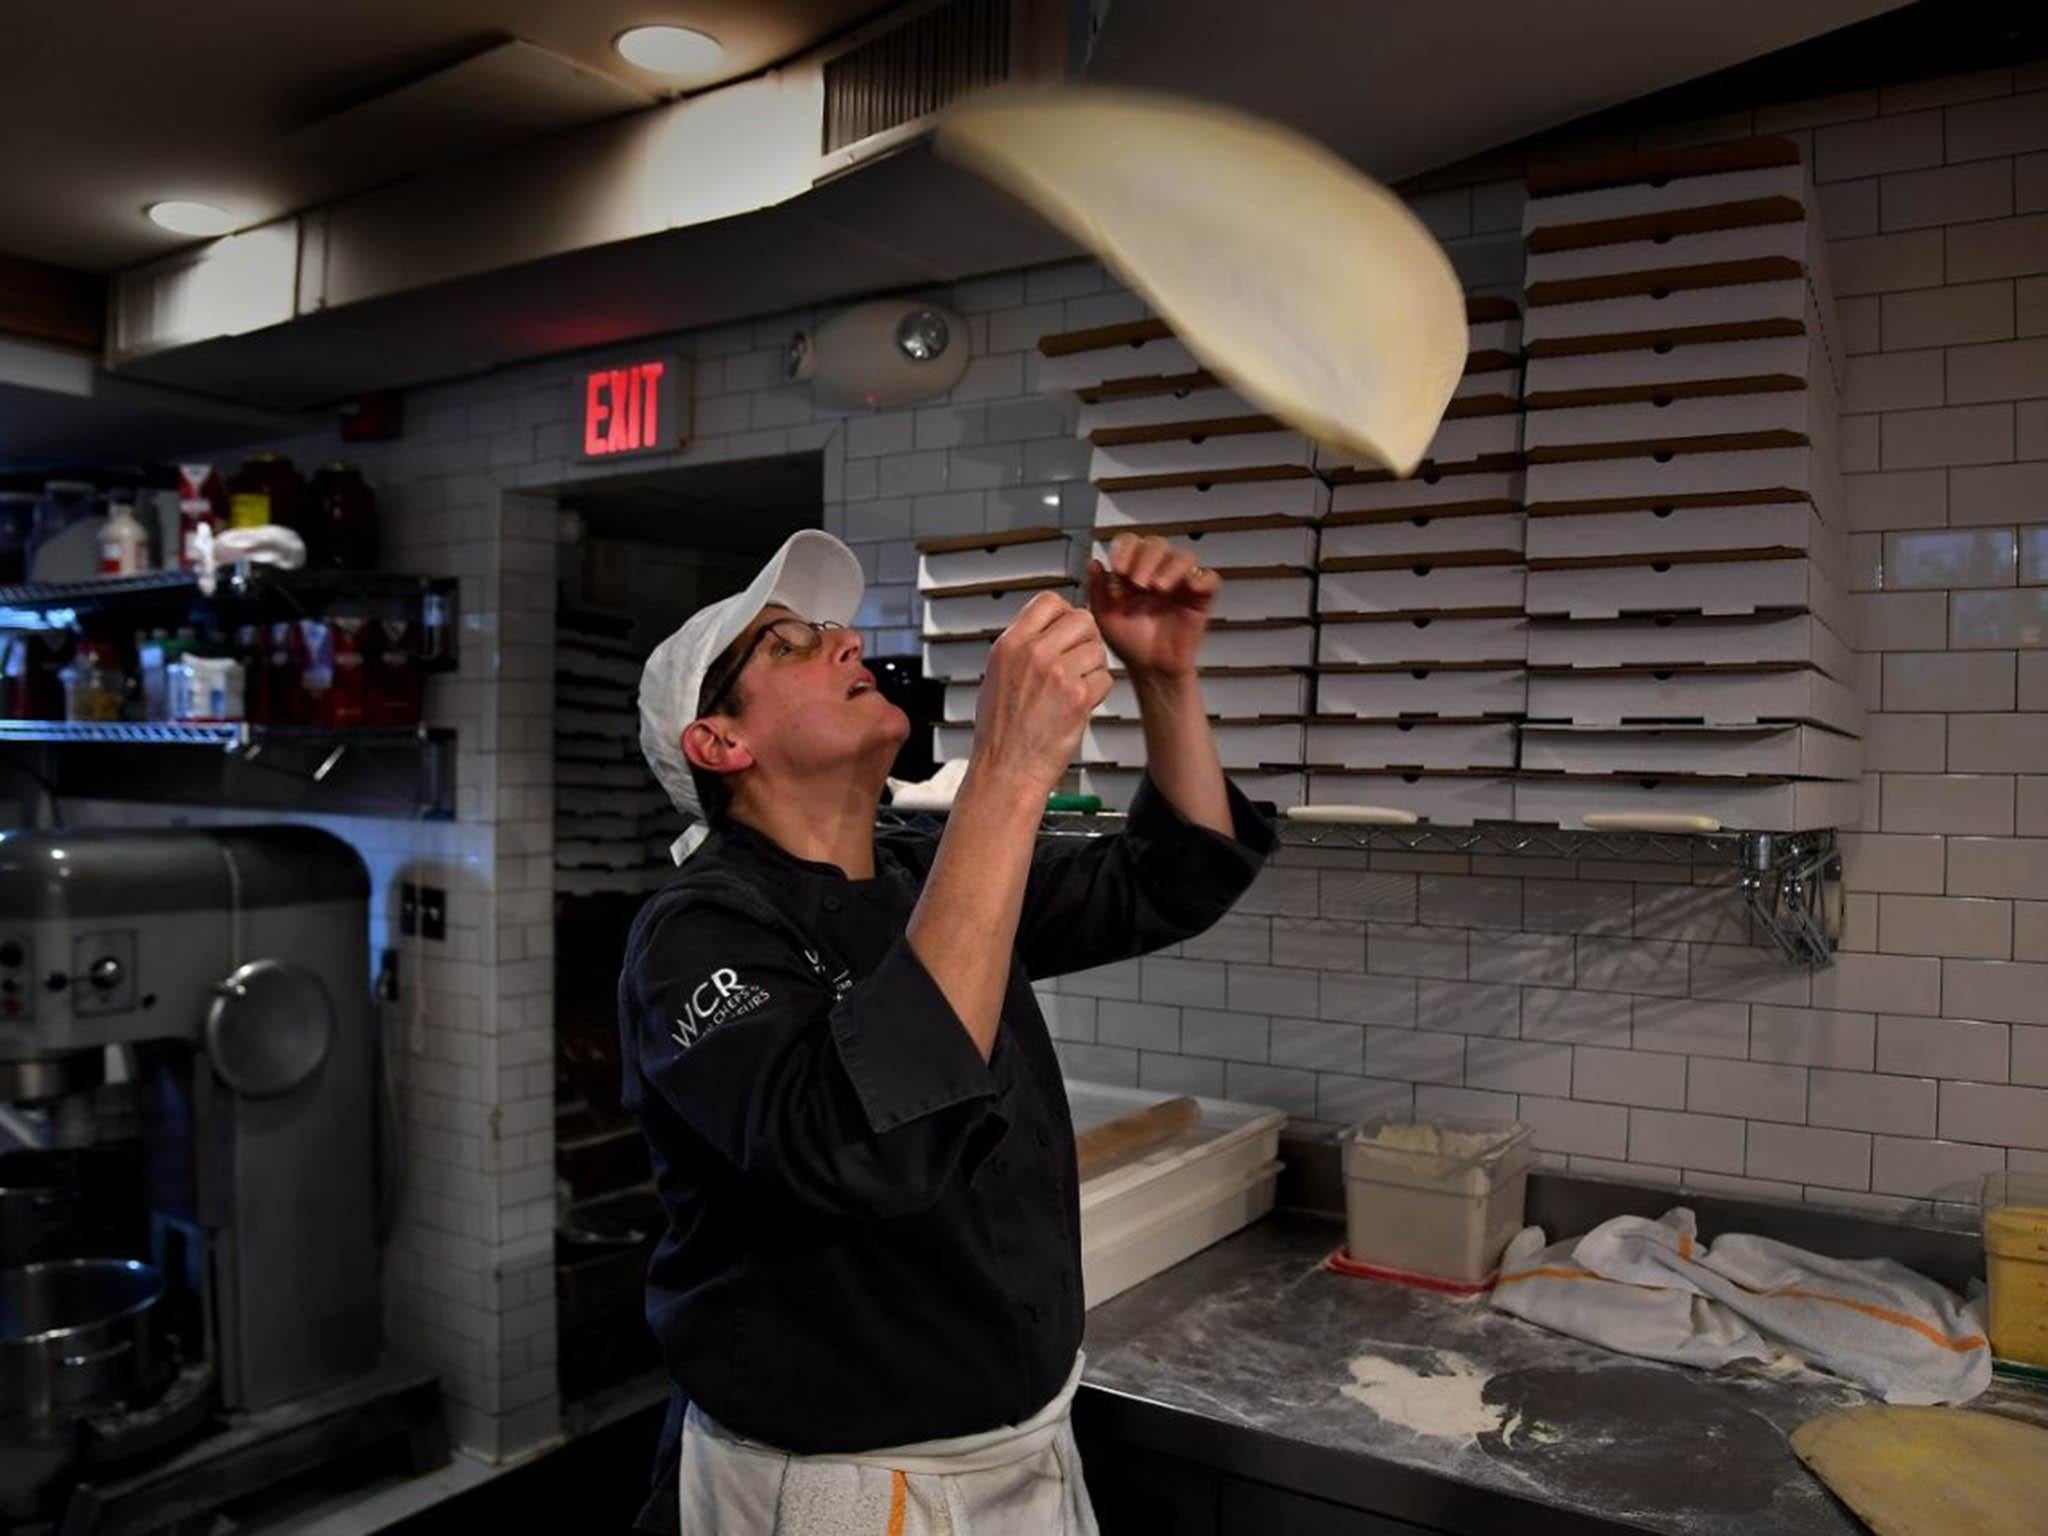 Ruth Gresser, the owner of Pizzeria Paradiso still has her chops to flip pizza dough as she worked the lunch rush